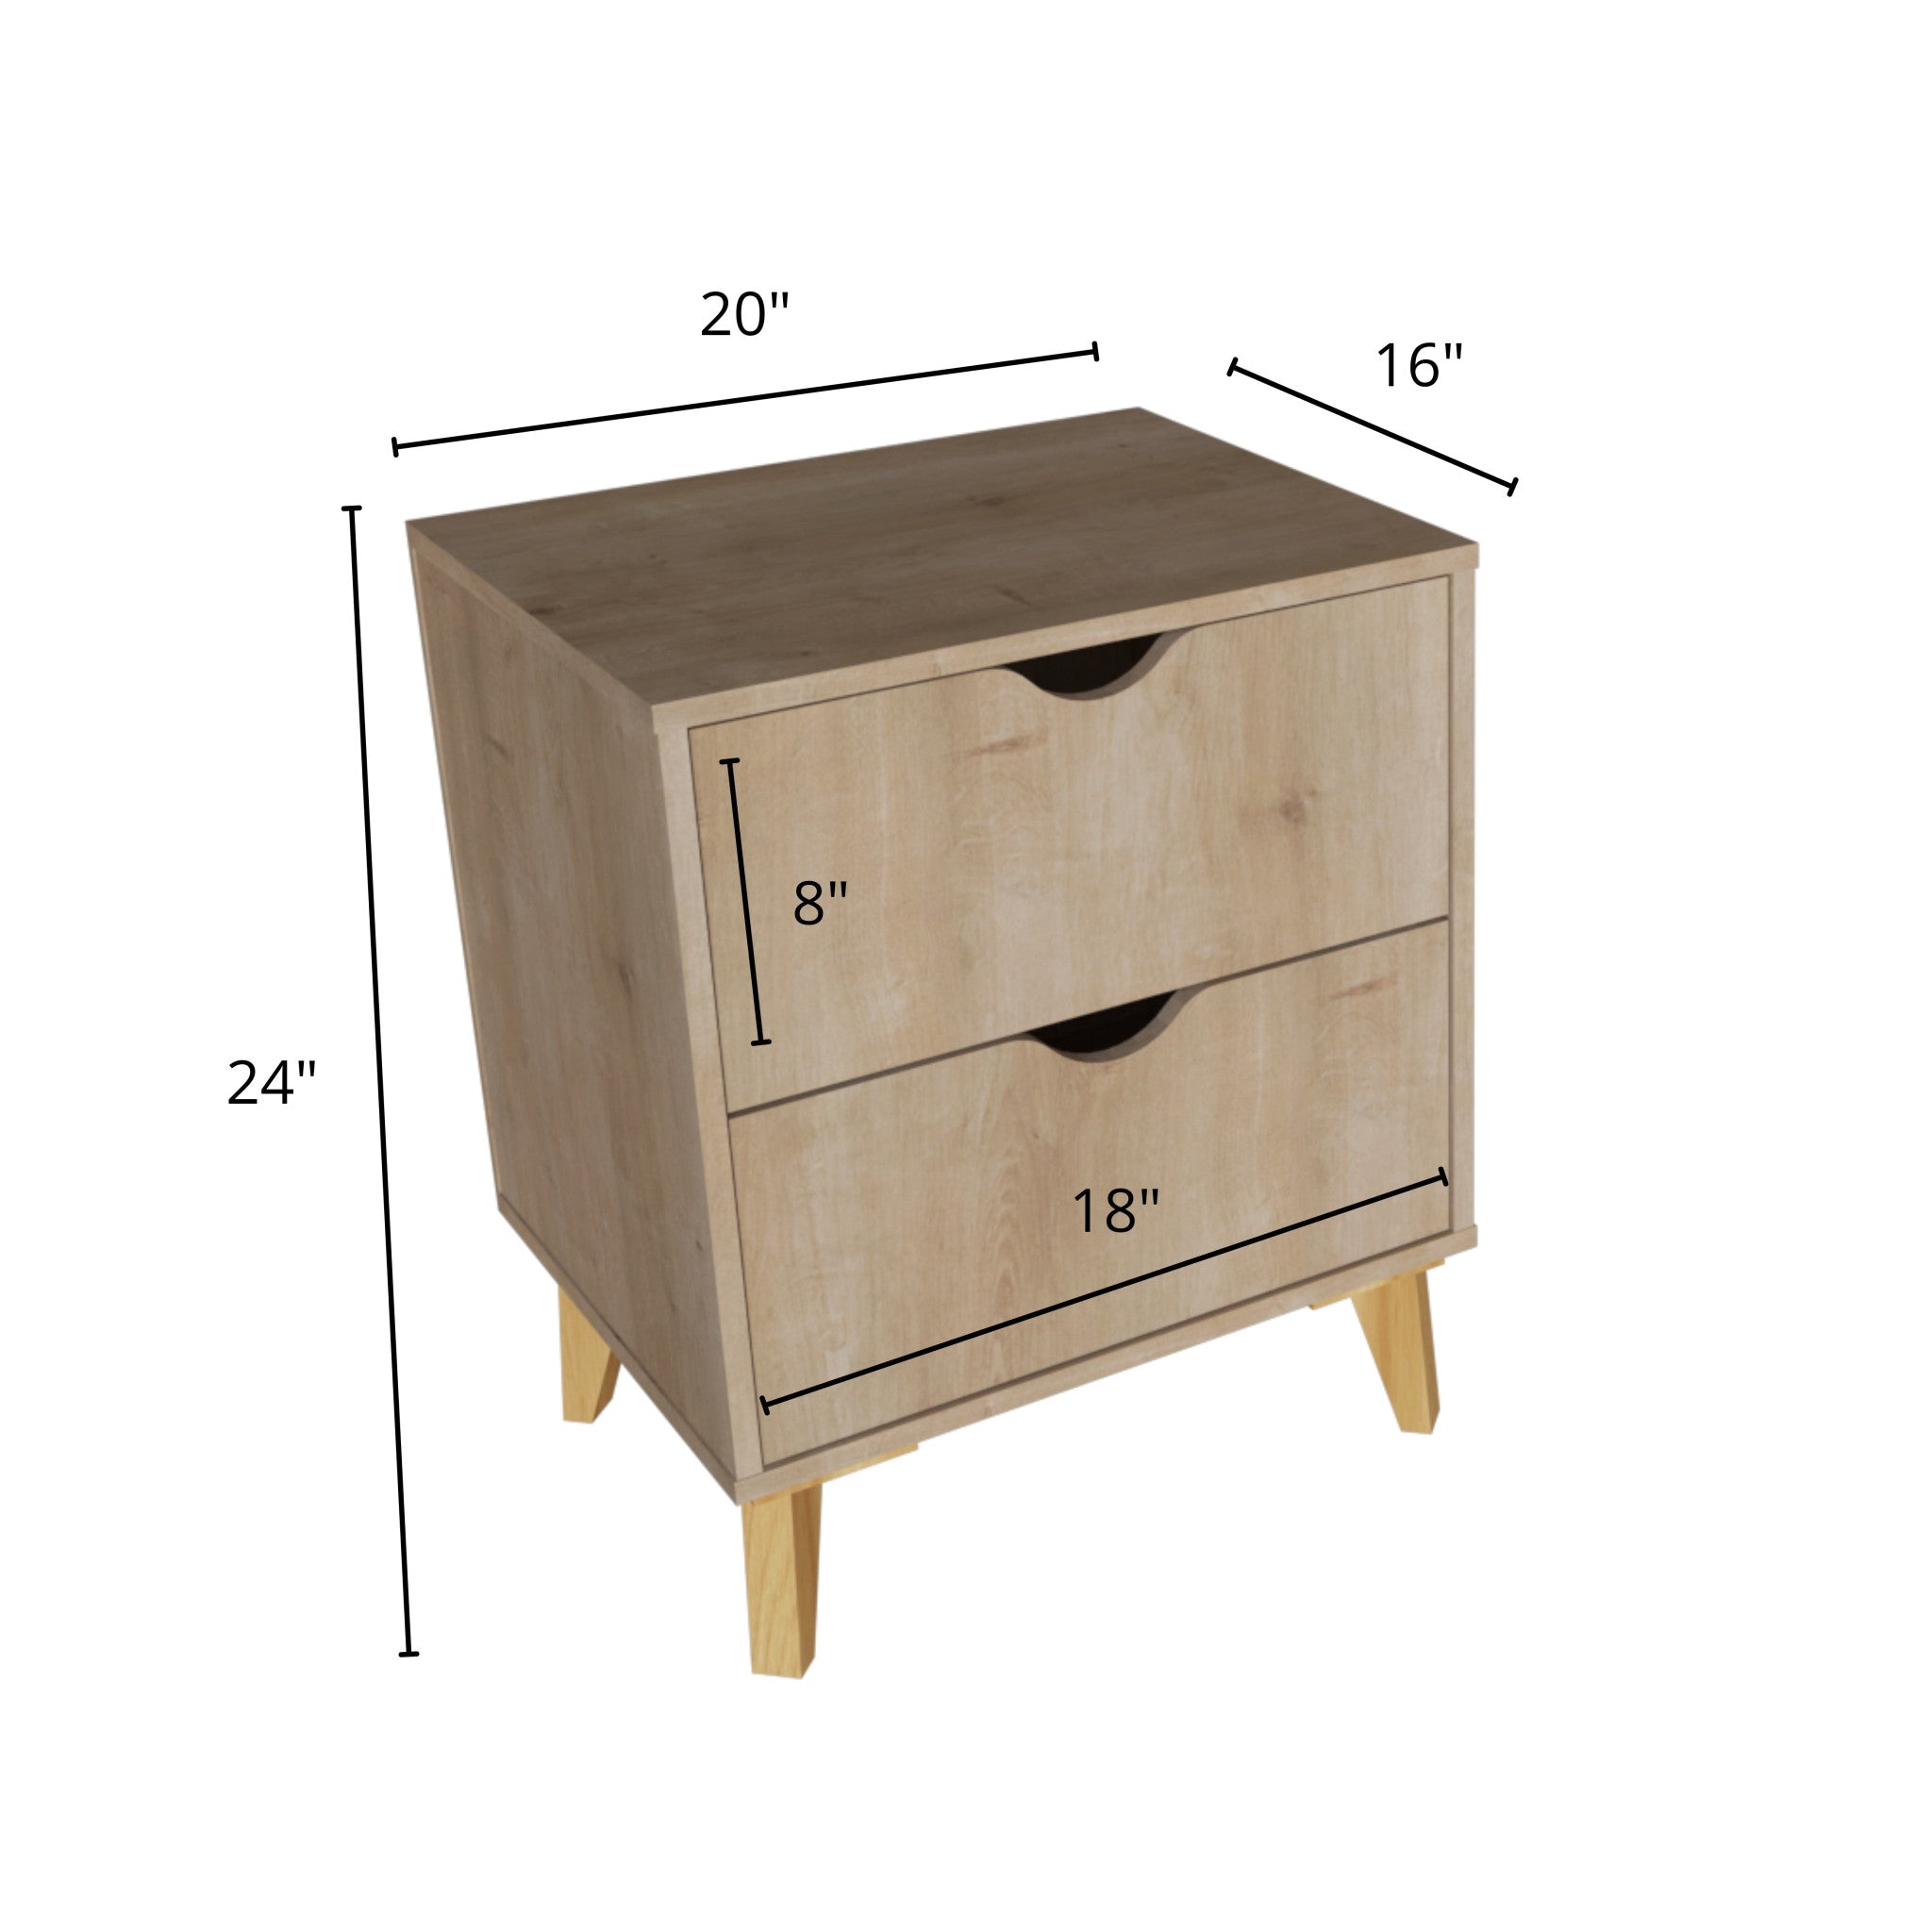 20" Natural Two Drawer Faux Wood Nightstand